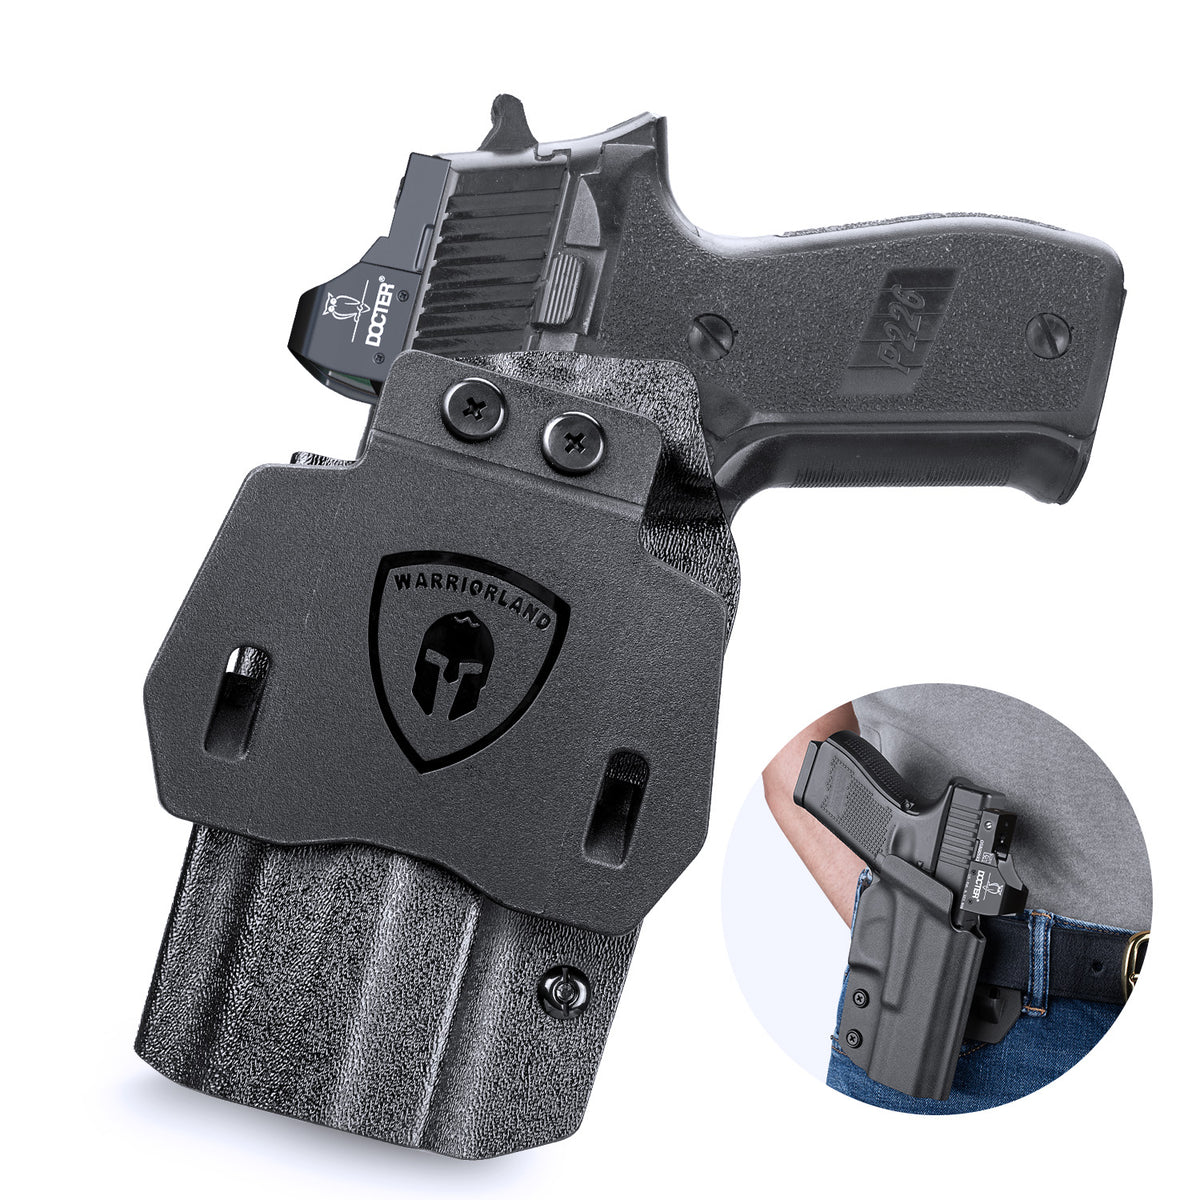 Sig P226 Holster OWB Kydex Holster Optics Cut: Sig Sauer P226 Full Size 4.4'' Pistol, Outside Waistband Open Carry P226 Holster with 1.75 Inch Paddle, Adj. Retention, Right Hand|WARRIORLAND